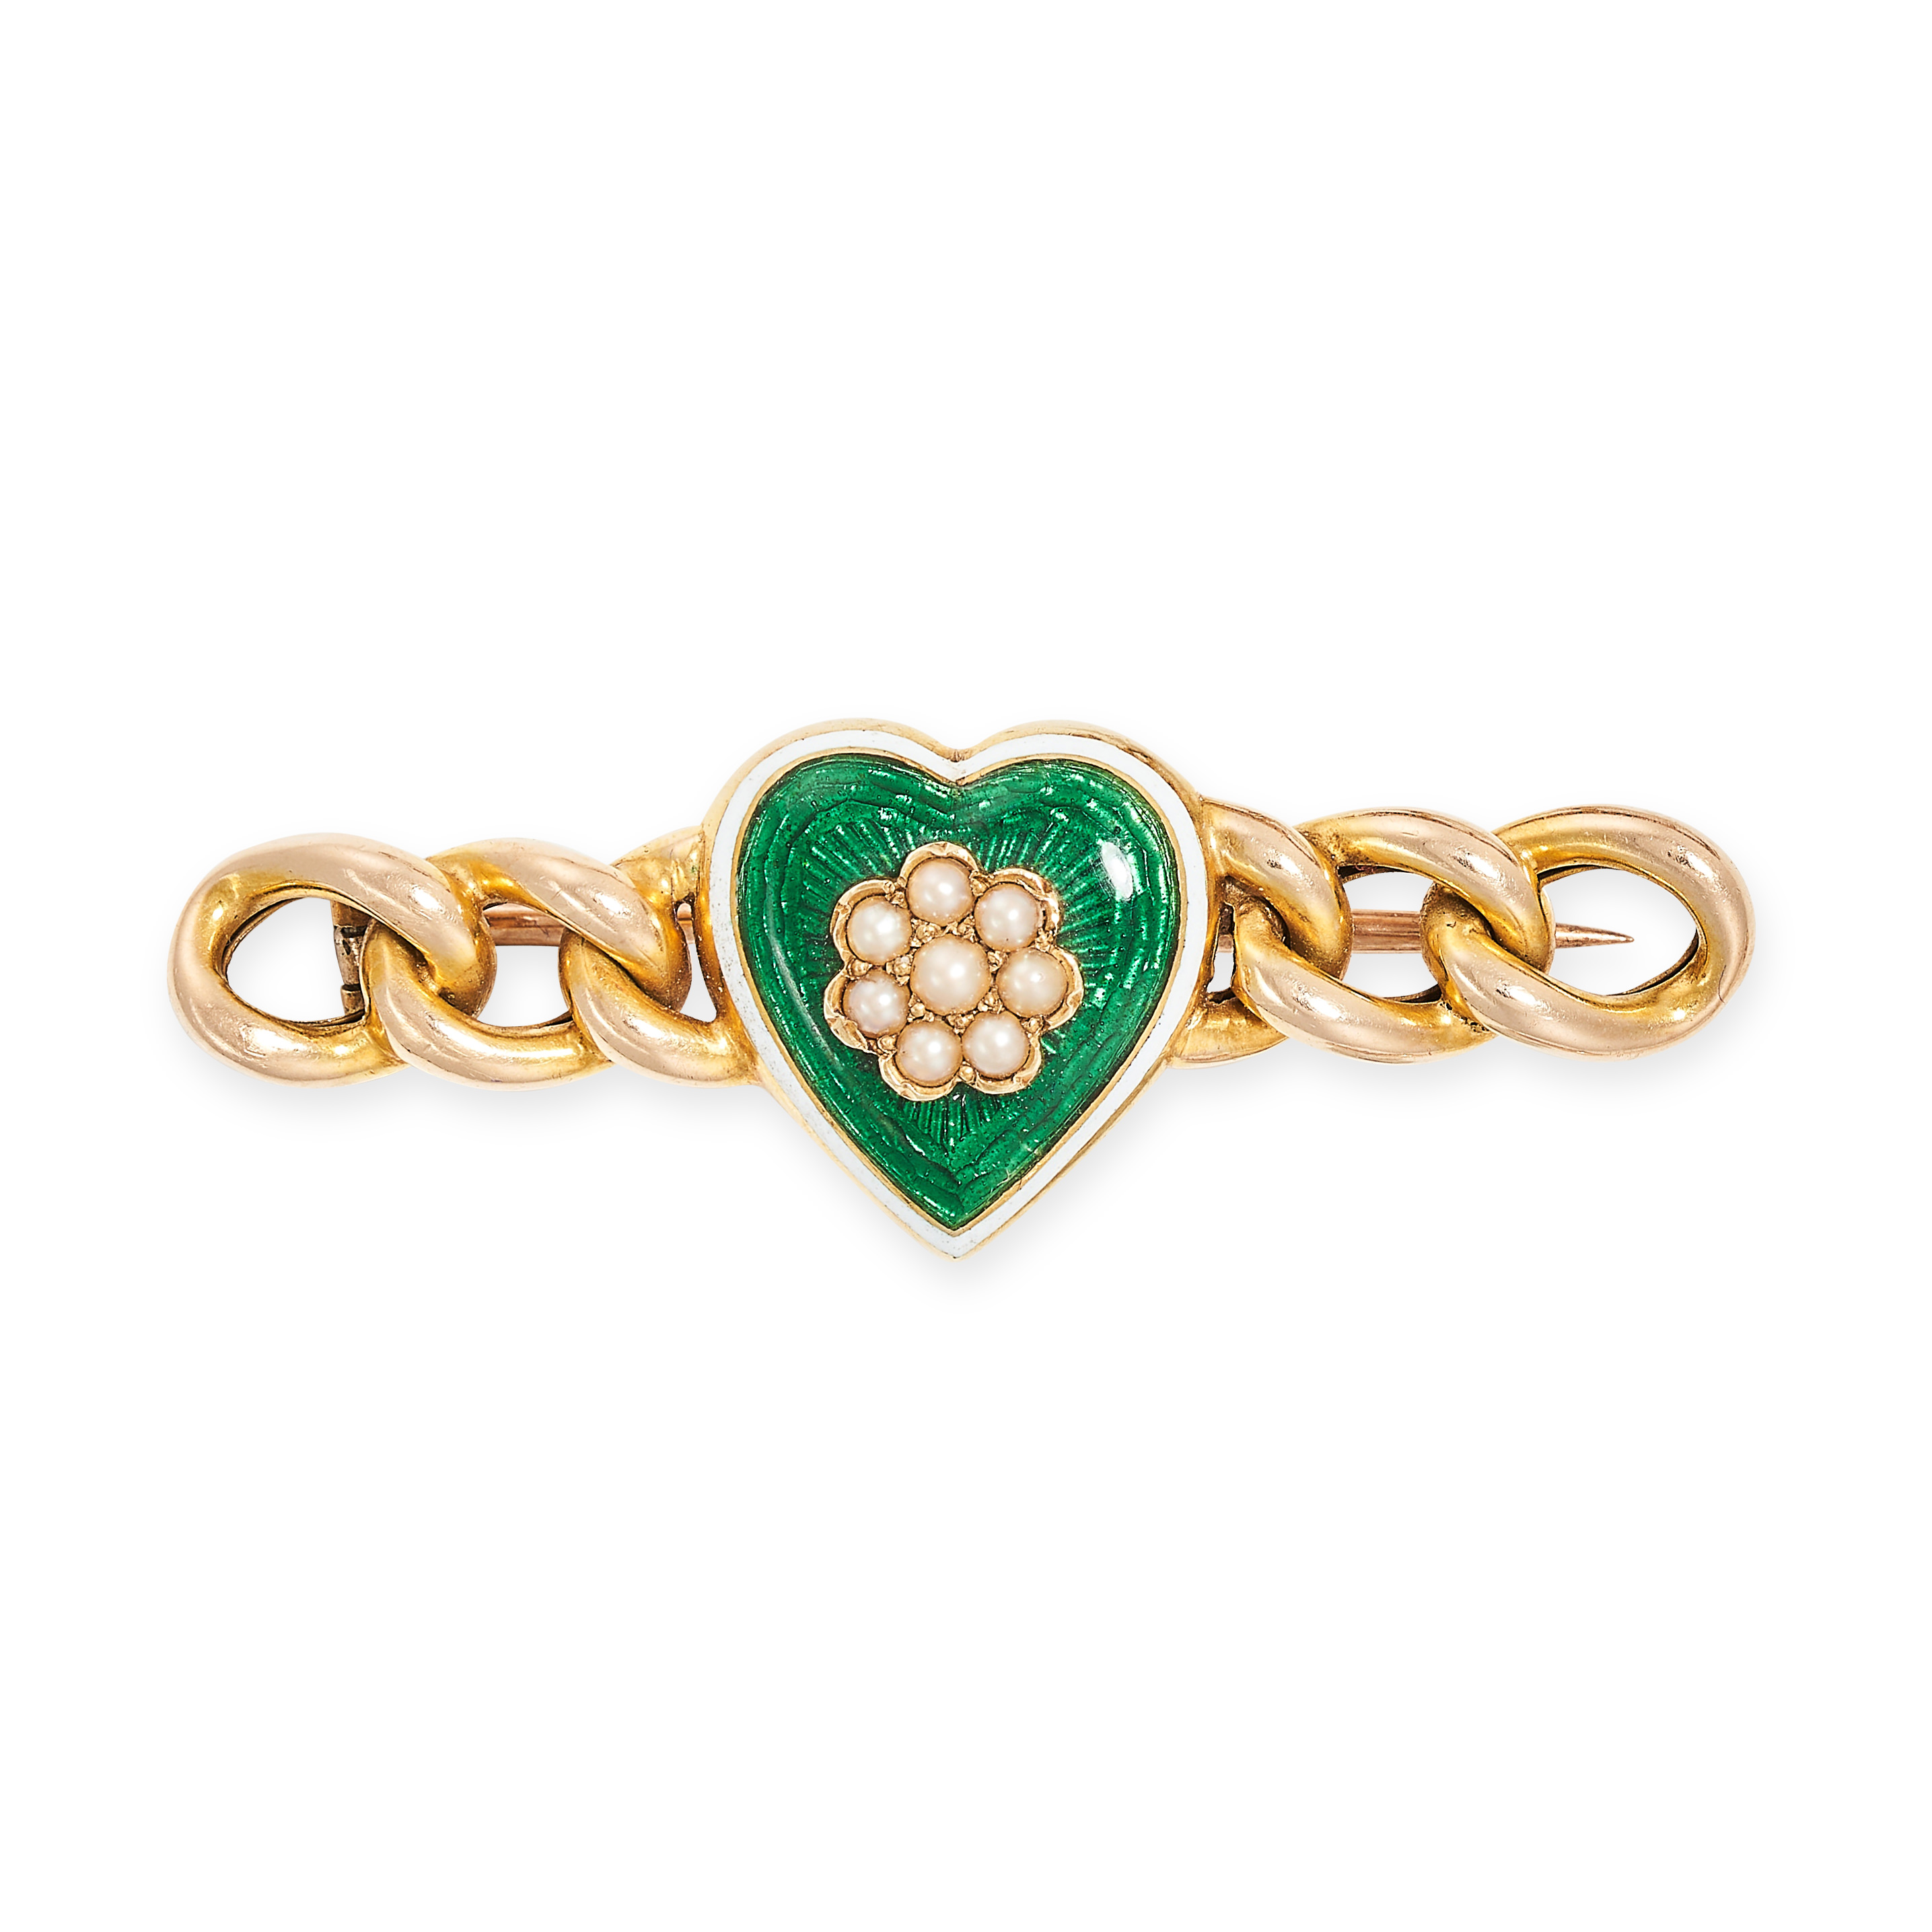 AN ANTIQUE ENAMEL AND PEARL HEART BROOCH in 15ct yellow gold, designed as a series of interlocking